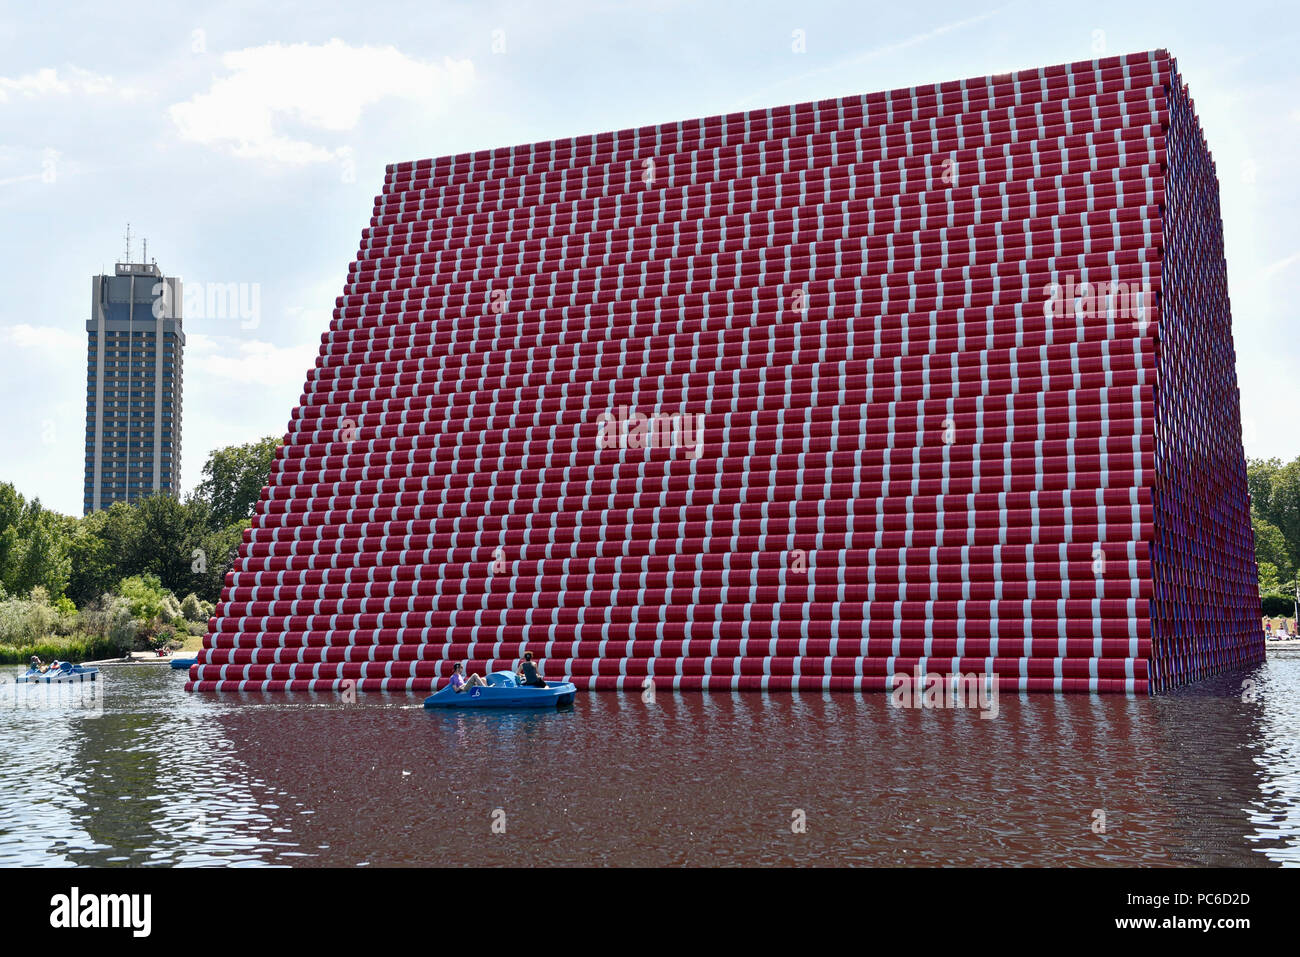 London, UK.  1 August 2018. UK Weather - People in pedal boats pass by "The London Mastaba" on The Serpentine during warm weather in Hyde Park. The sculpture by artist Christo and Jeanne-Claude comprises 7,506 horizontally-stacked coloured barrels, in hues of red, blue, mauve and white, secured on a floating platform.  The geometric form takes inspiration from ancient mastabas from Mesopotamia and will be on display until 21 September 2018. Temperatures are forecast to increase back to the 30s in time for the weekend.  Credit: Stephen Chung / Alamy Live News Stock Photo